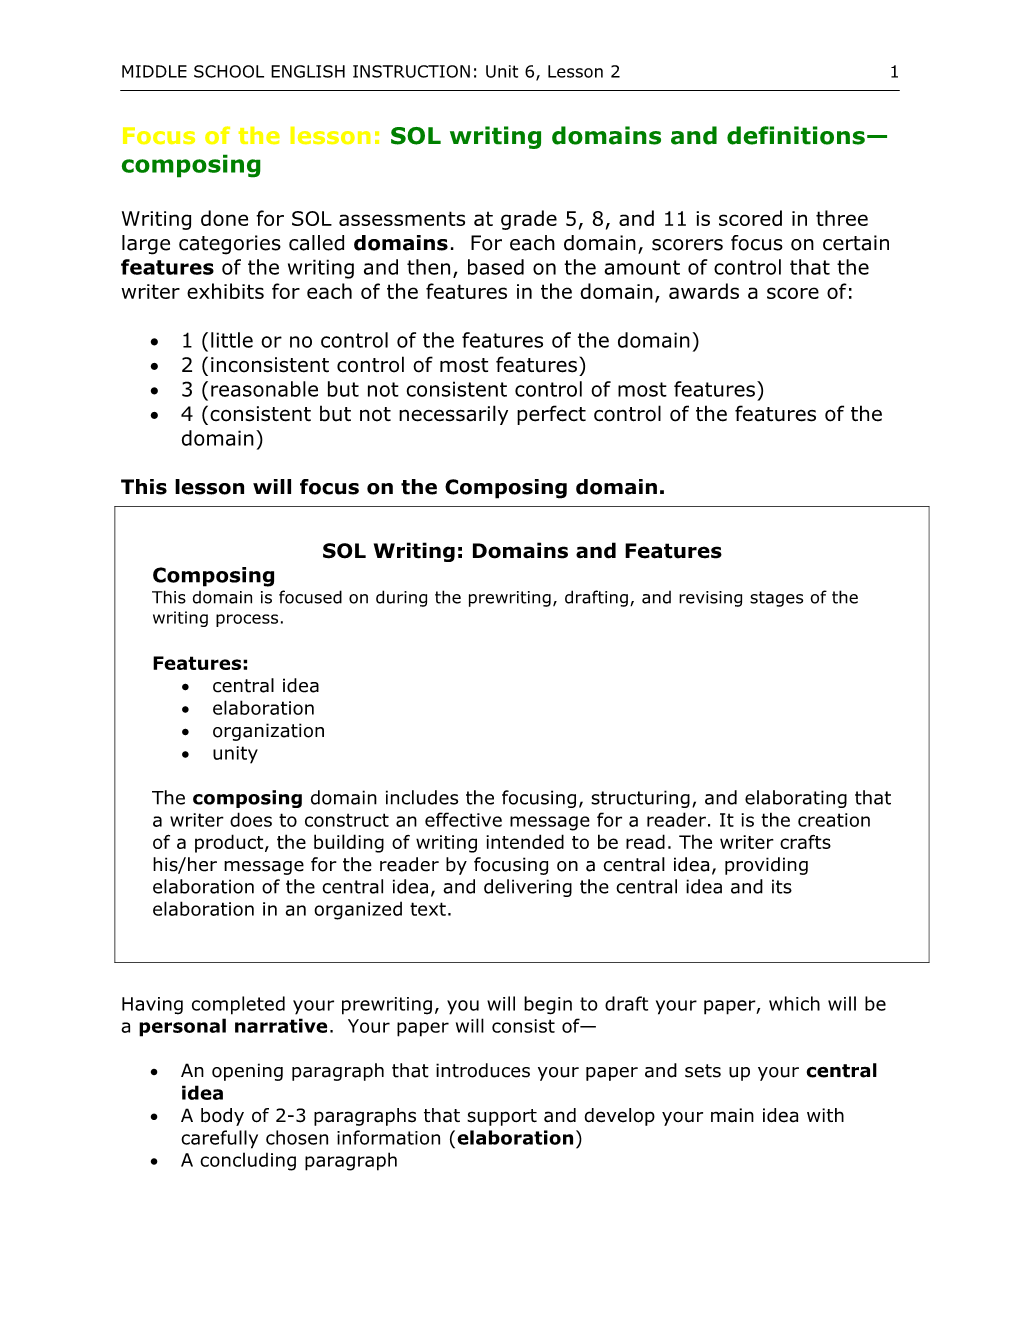 Focus of the Lesson: SOL Writing: Domains and Definitions